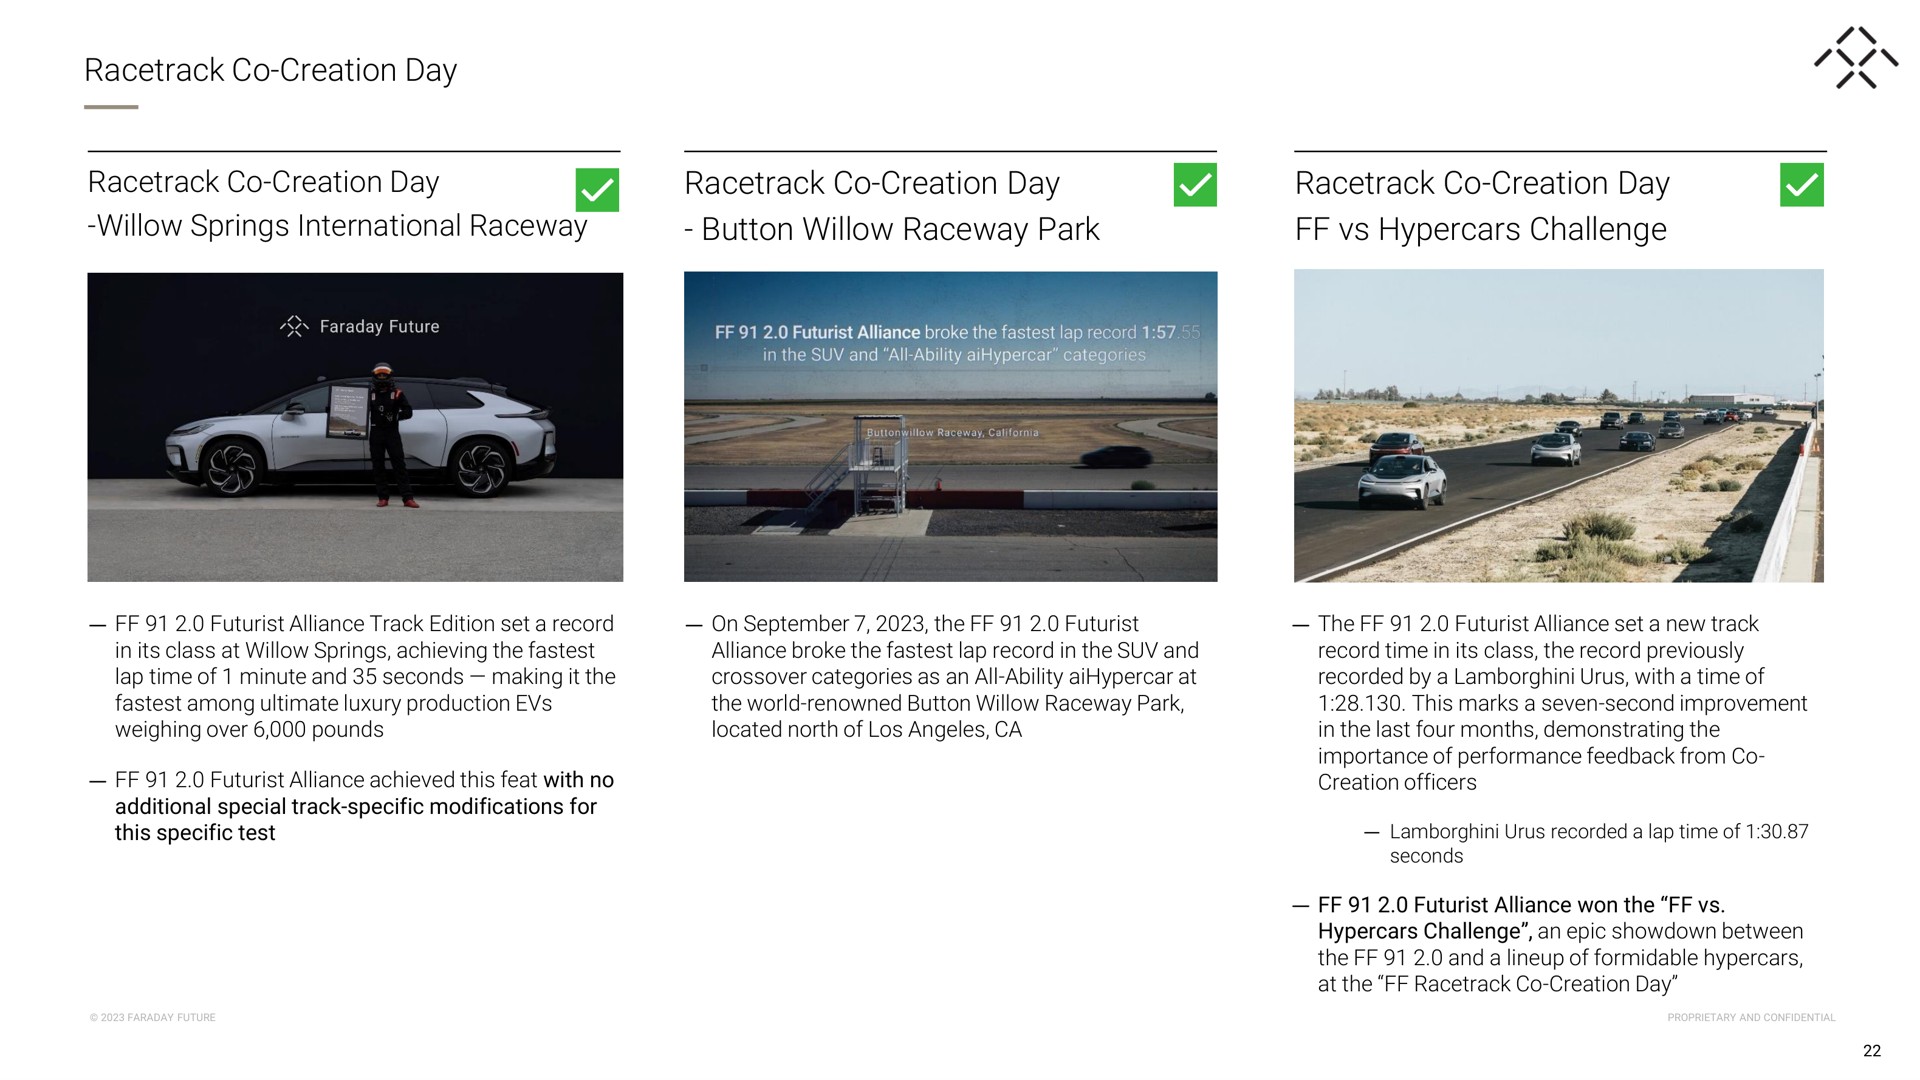 creation day creation day willow springs international raceway creation day button willow raceway park creation day challenge | Faraday Future